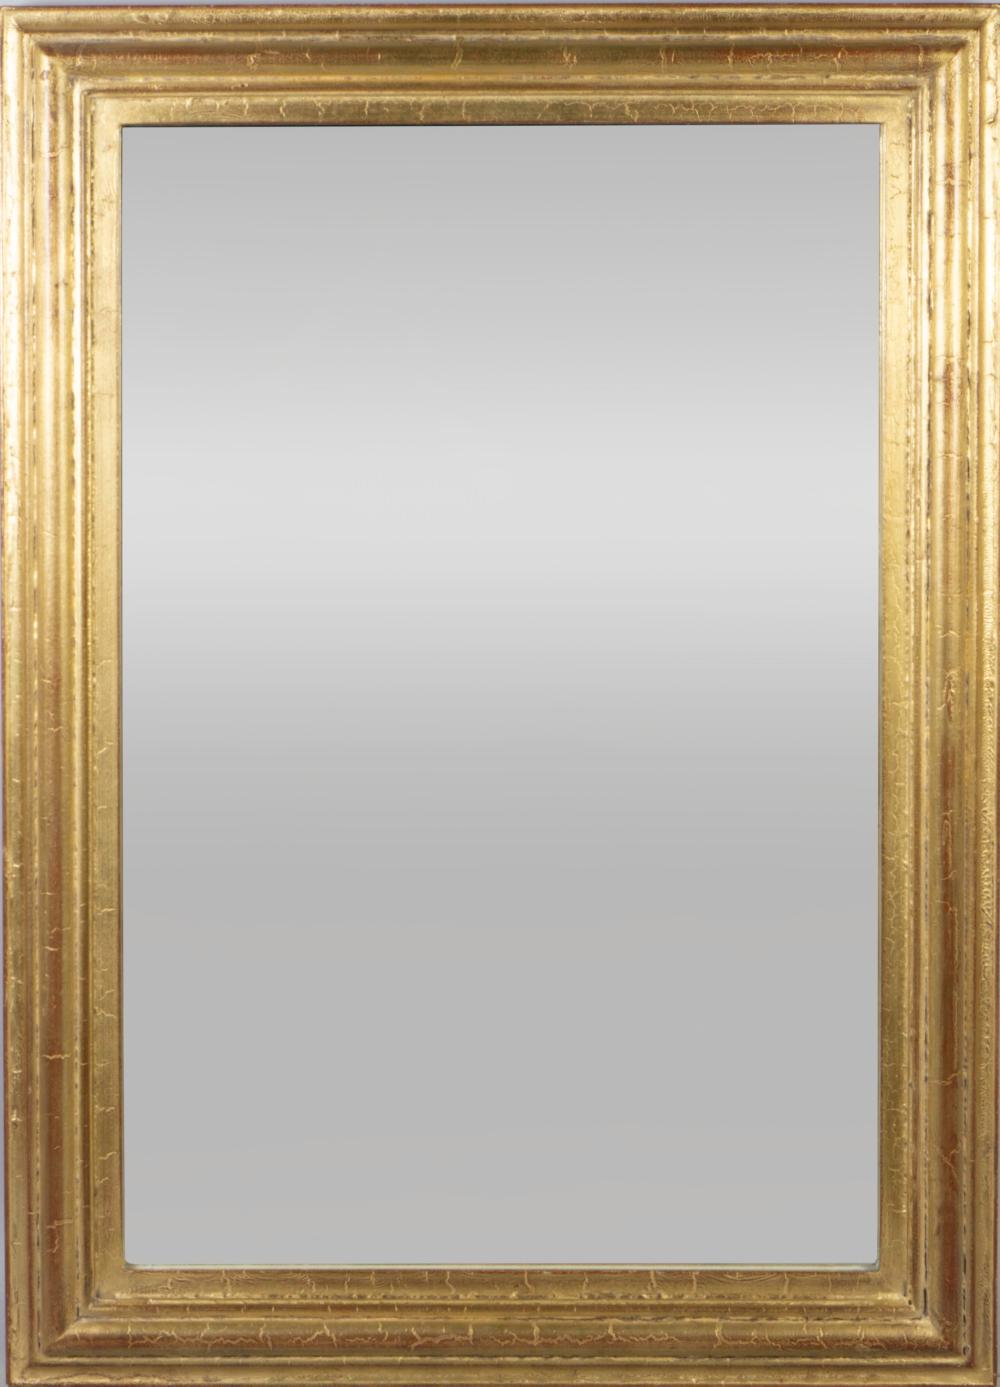 CLASSICAL STYLE GOLD PAINTED MIRROR 33c84b